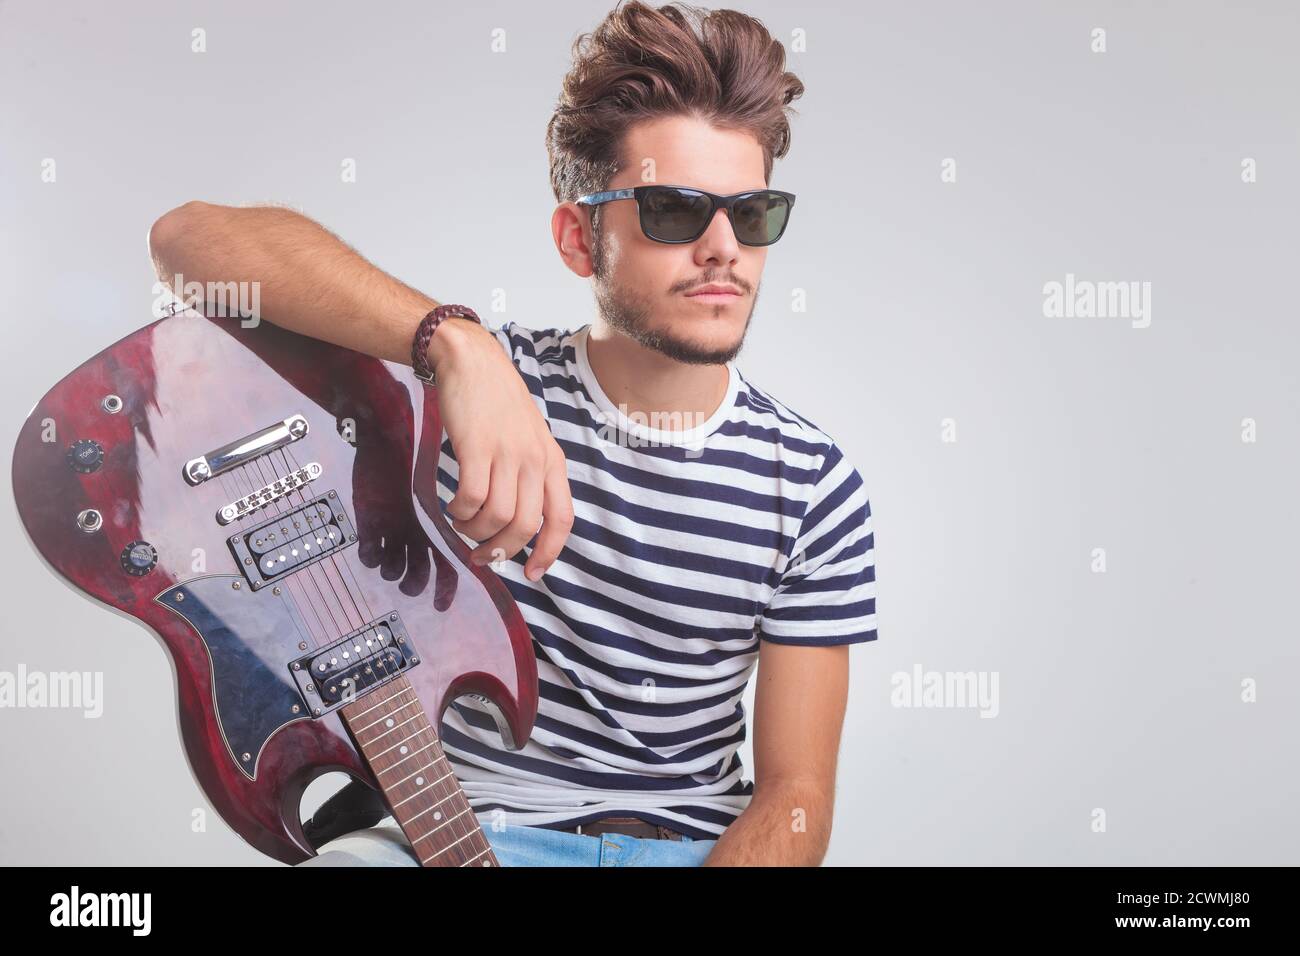 A Handsome Boy With Electric Guitar Posing. Stock Photo, Picture and  Royalty Free Image. Image 27932040.